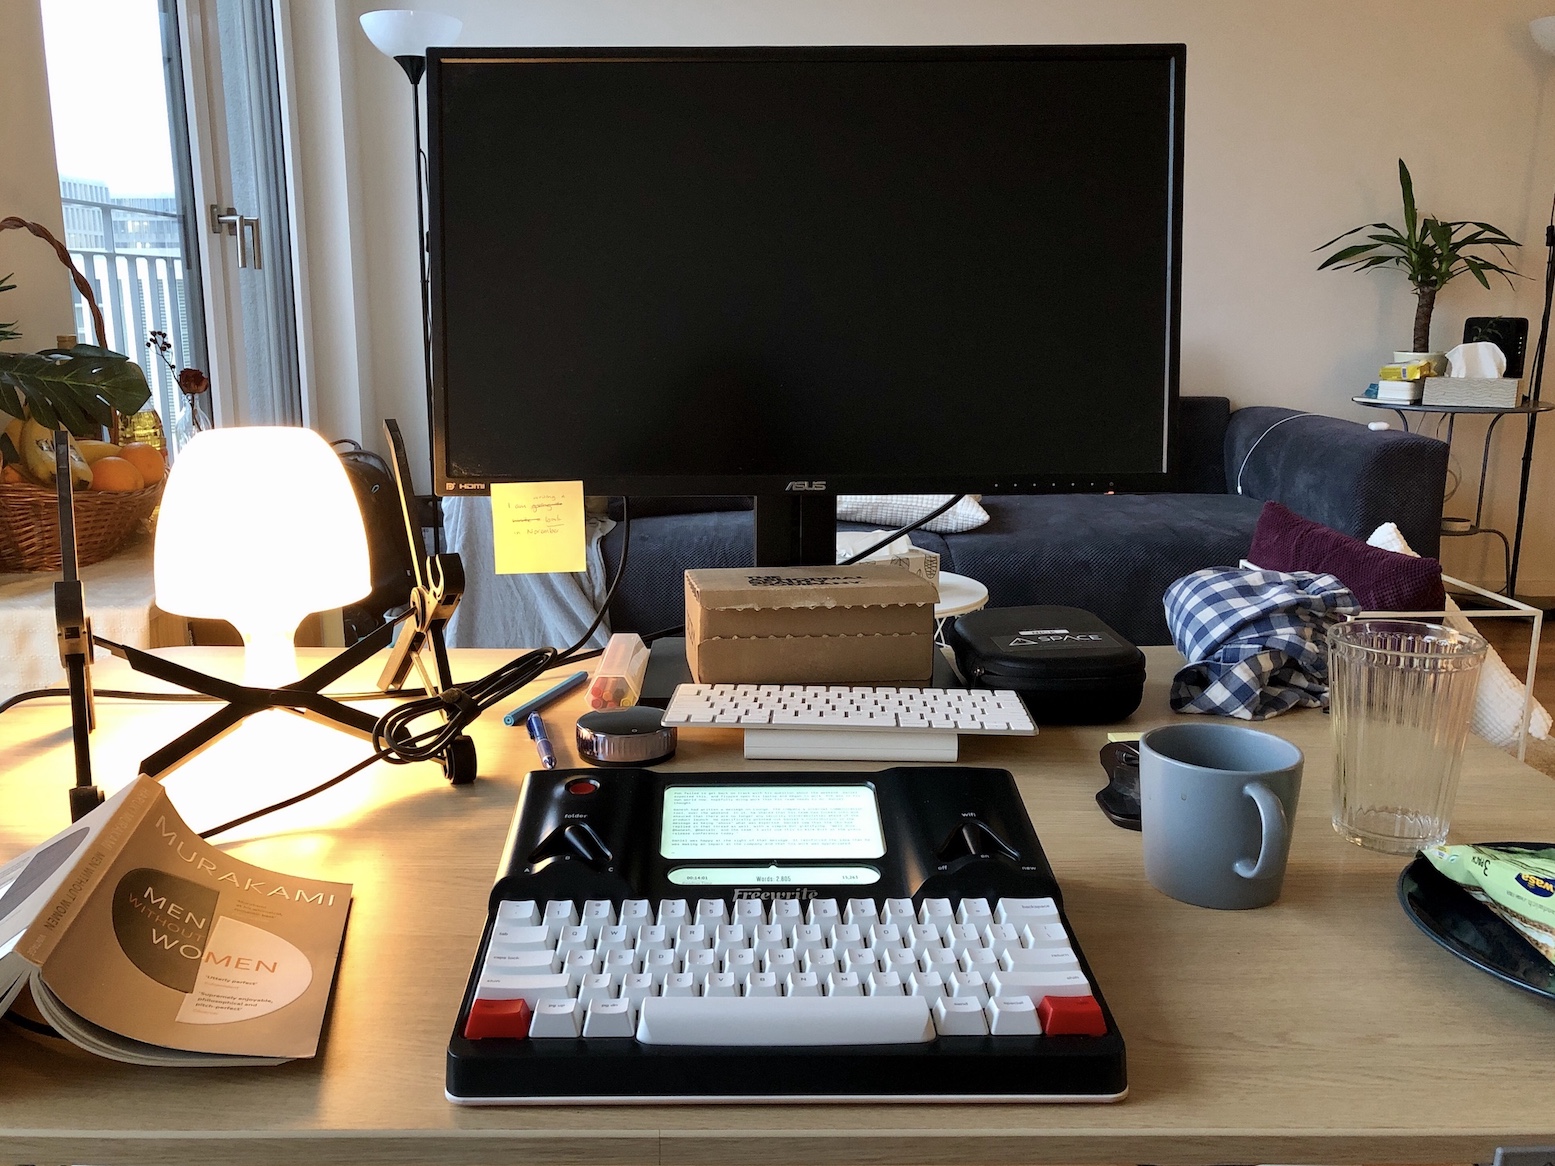 my writing setup at home during National Novel Writing Month in November 2020. That's a Freewrite on the desk